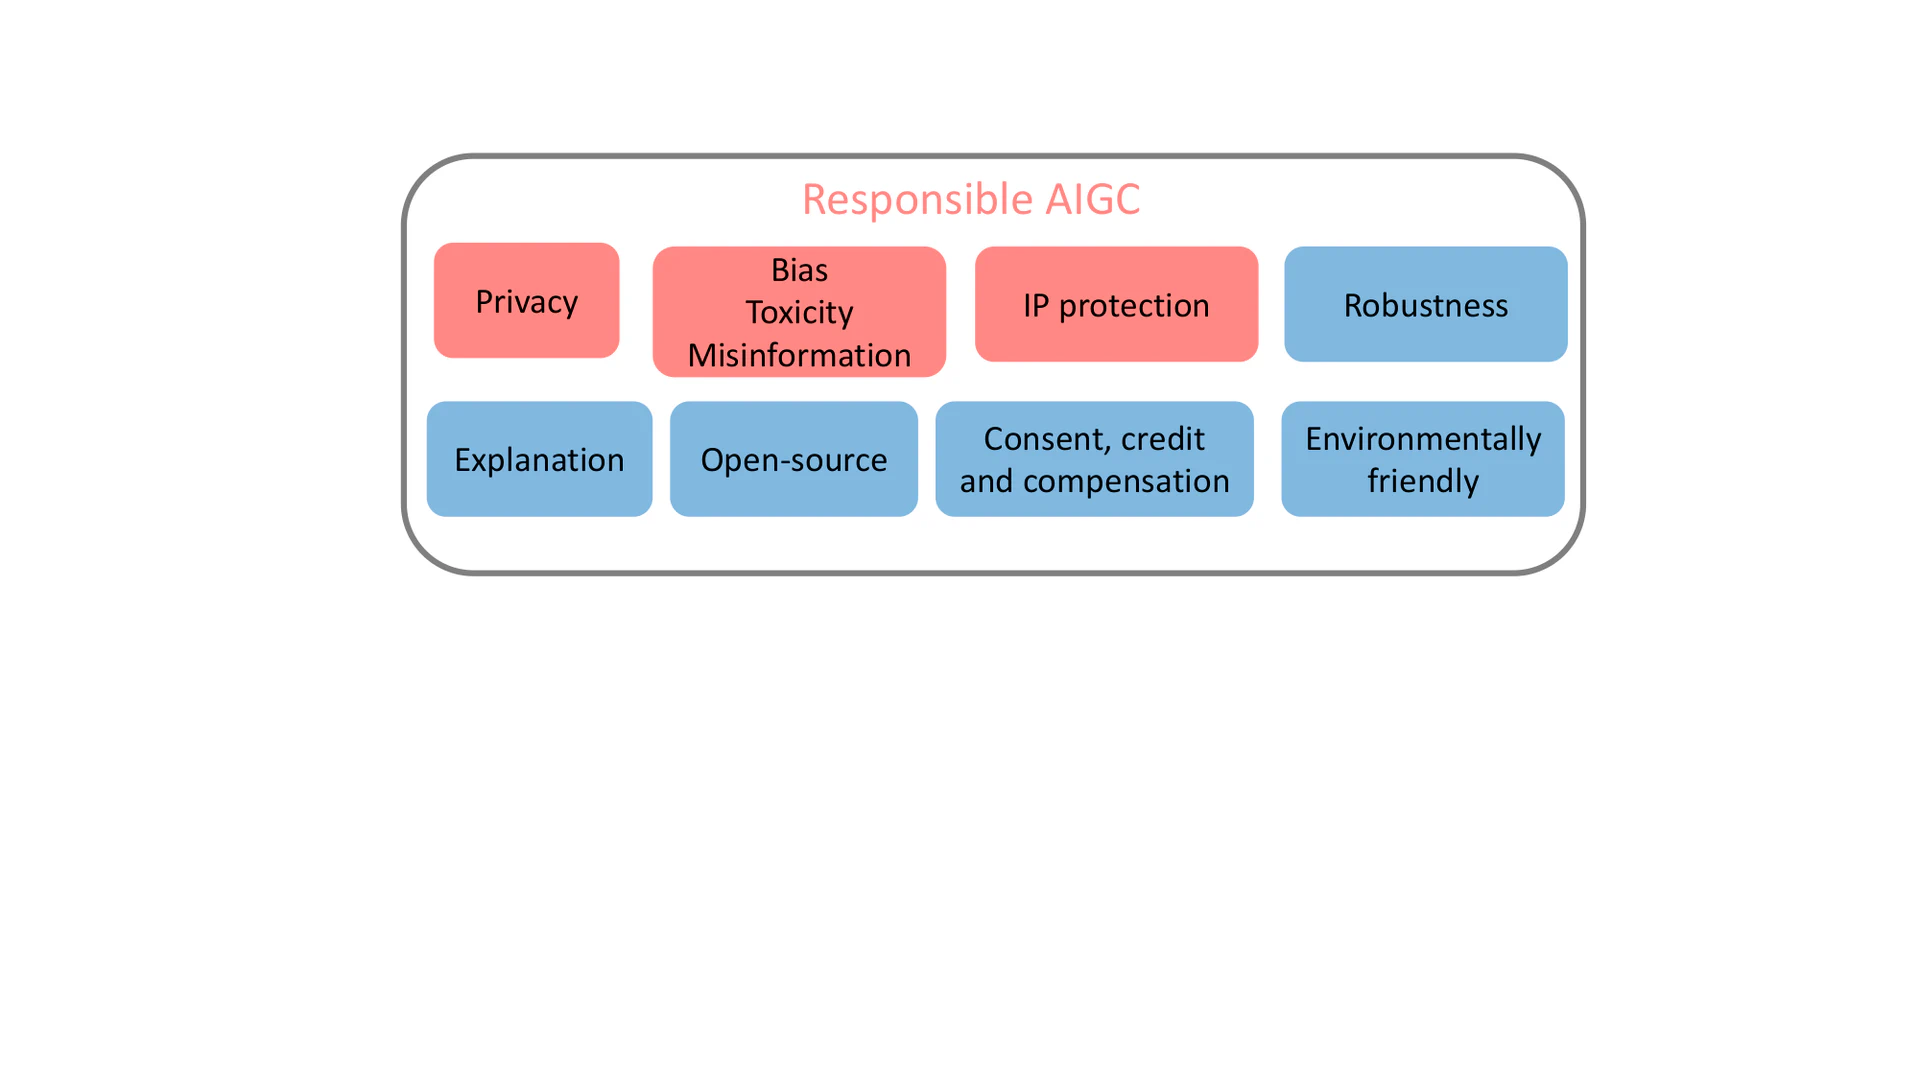 The scope of responsible AIGC.